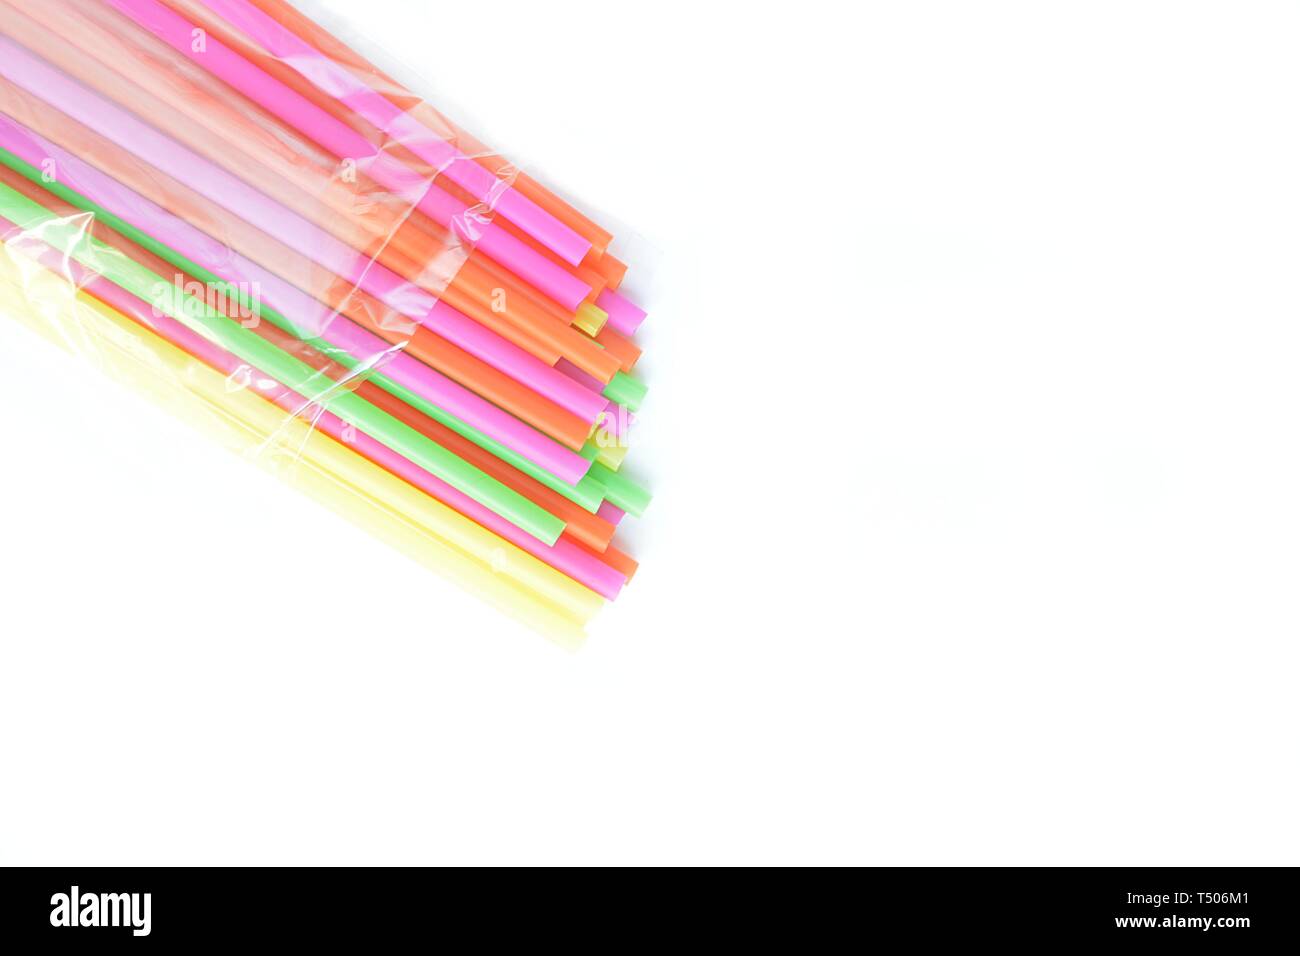 colored plastic drinking straws on a white background Stock Photo